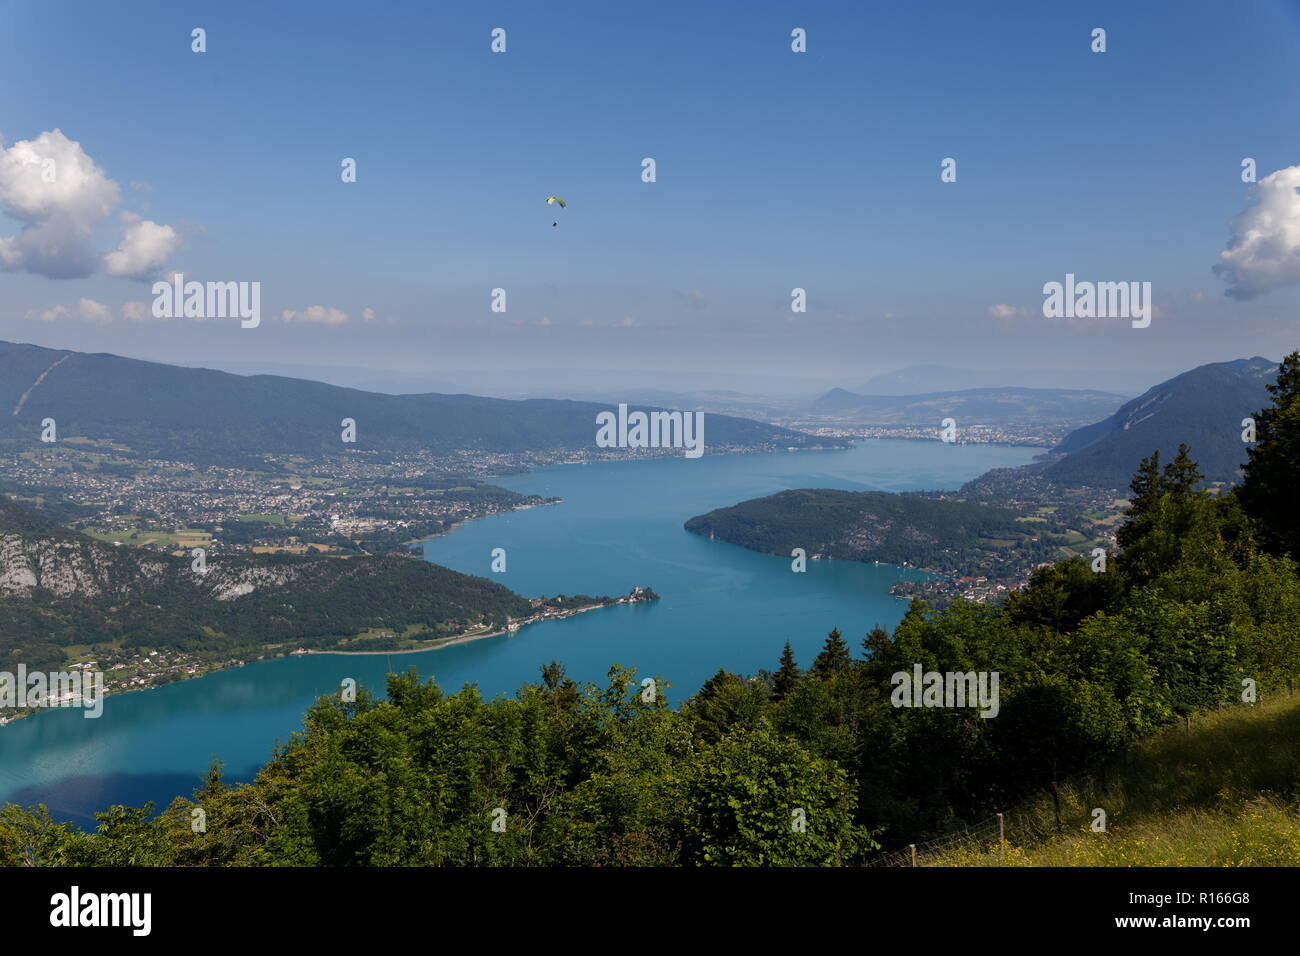 Single paraglider flying over the turquoise waters of  Lake Annecy  France Stock Photo